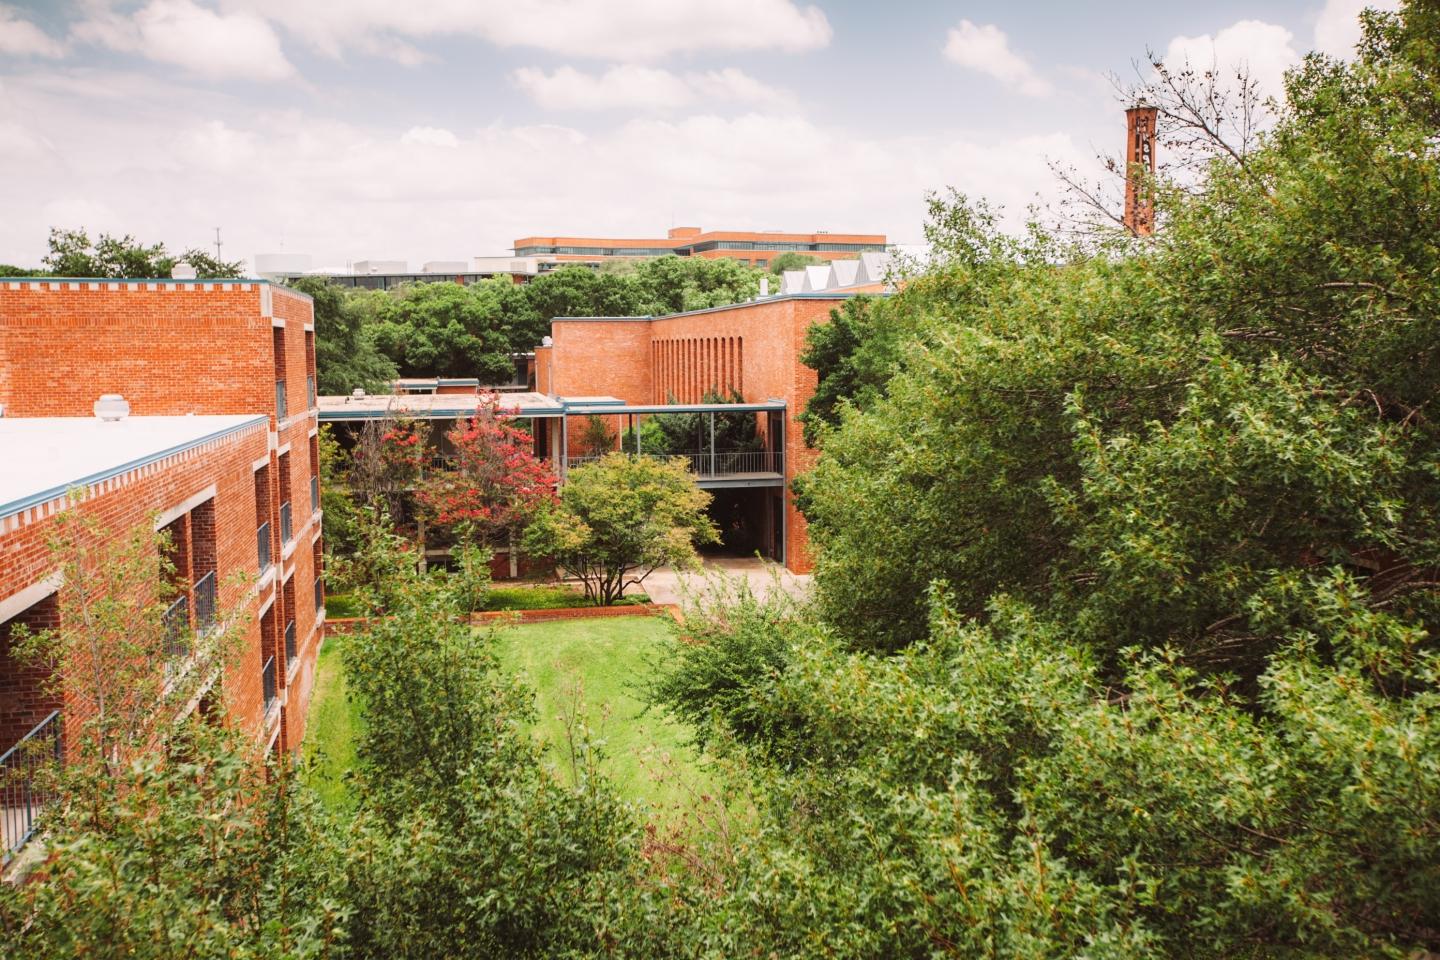 Ariel view of McLean Hall and courtyard